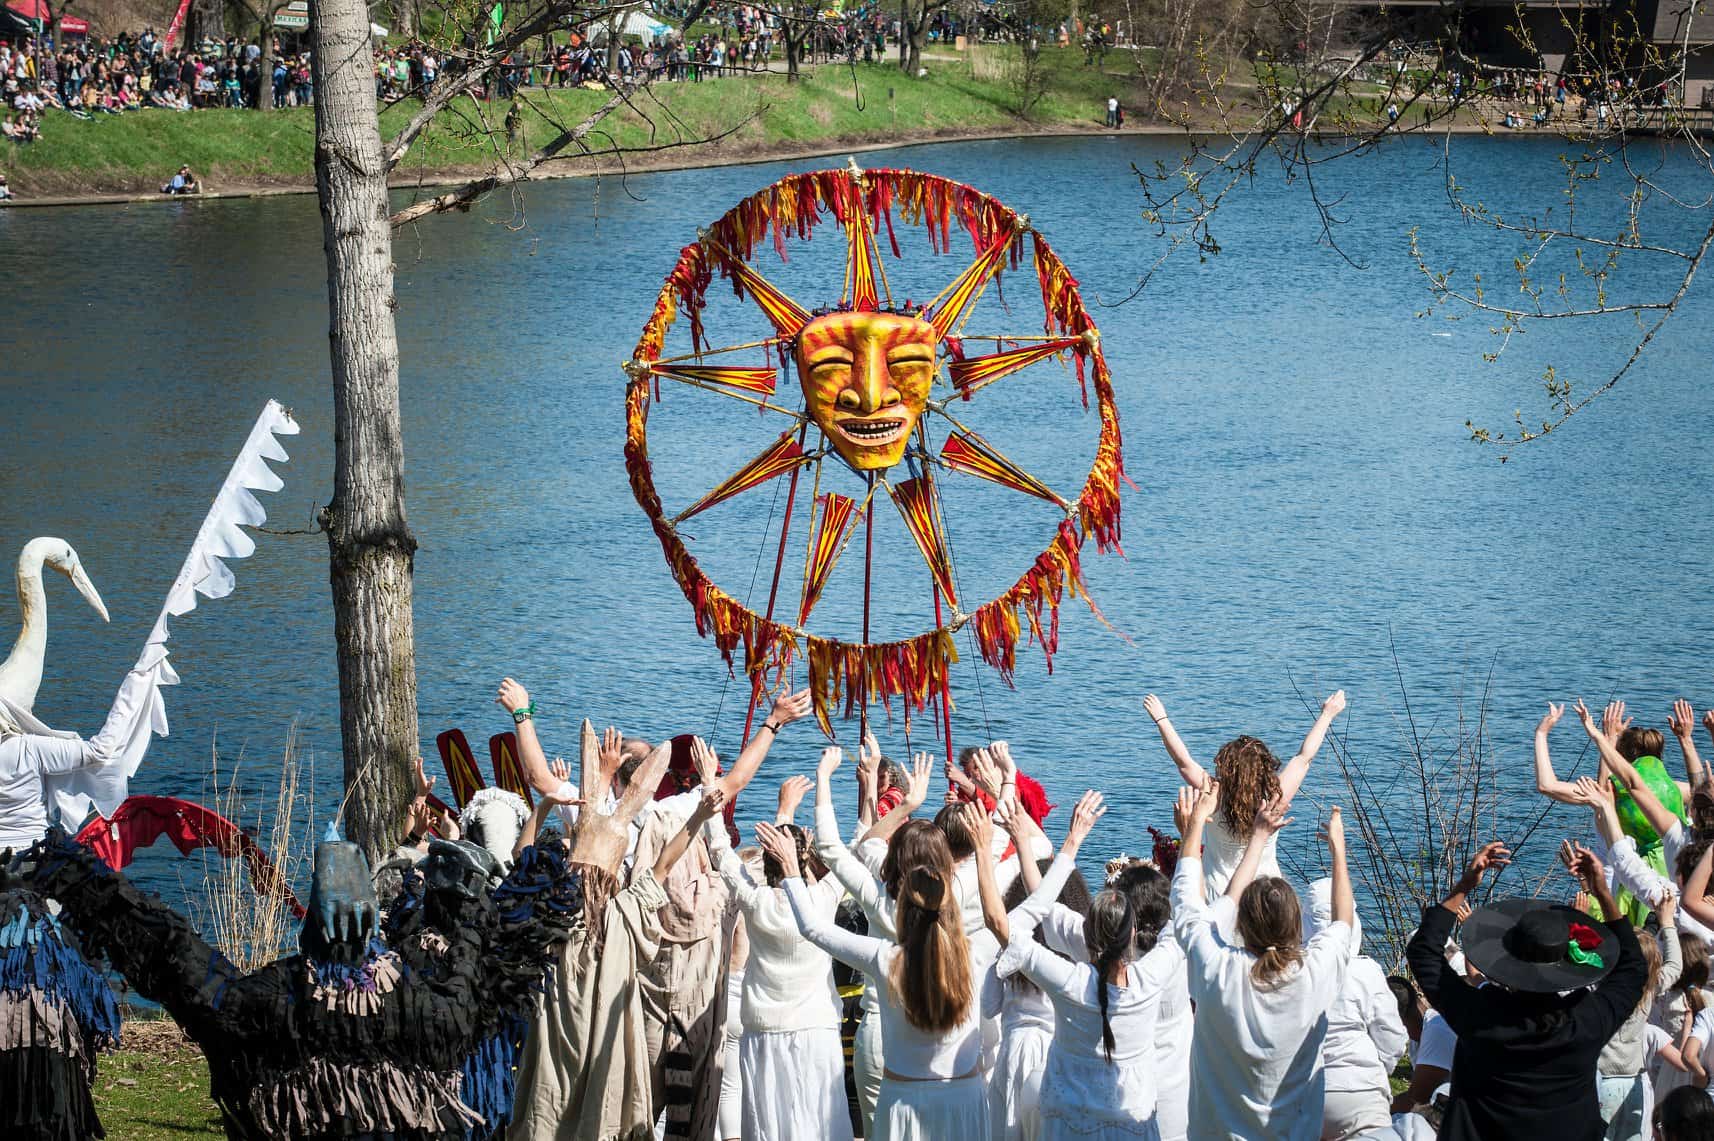 Image Description: A group of people stand together raising their arms. A few of them are holding up a large puppet that is a sun with a face. They are all in front of a lake.